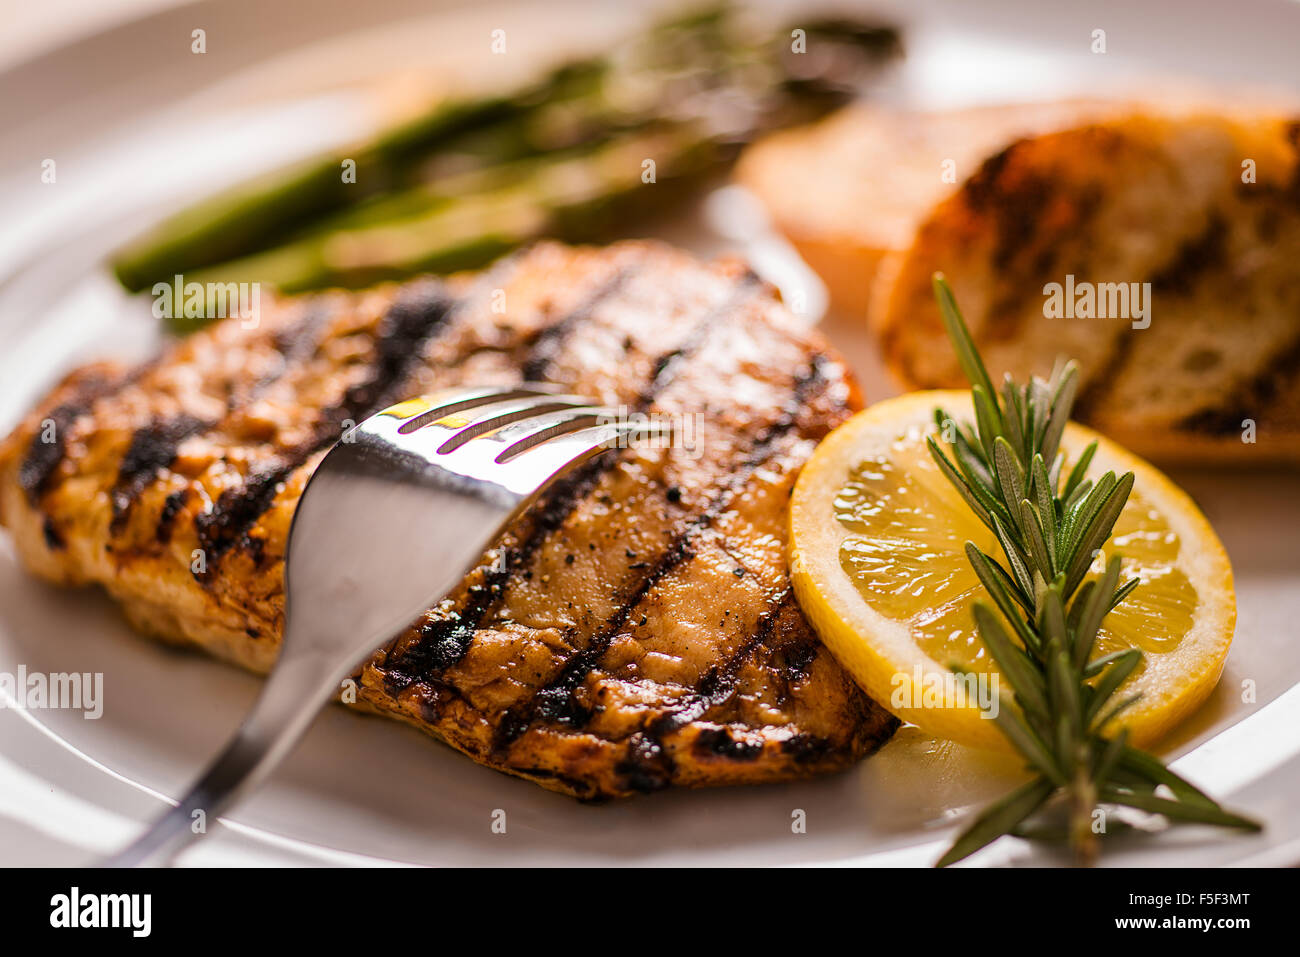 A grilled chicken breast  dinner on a plate with bread and asparagus, garnished with a lemon Stock Photo